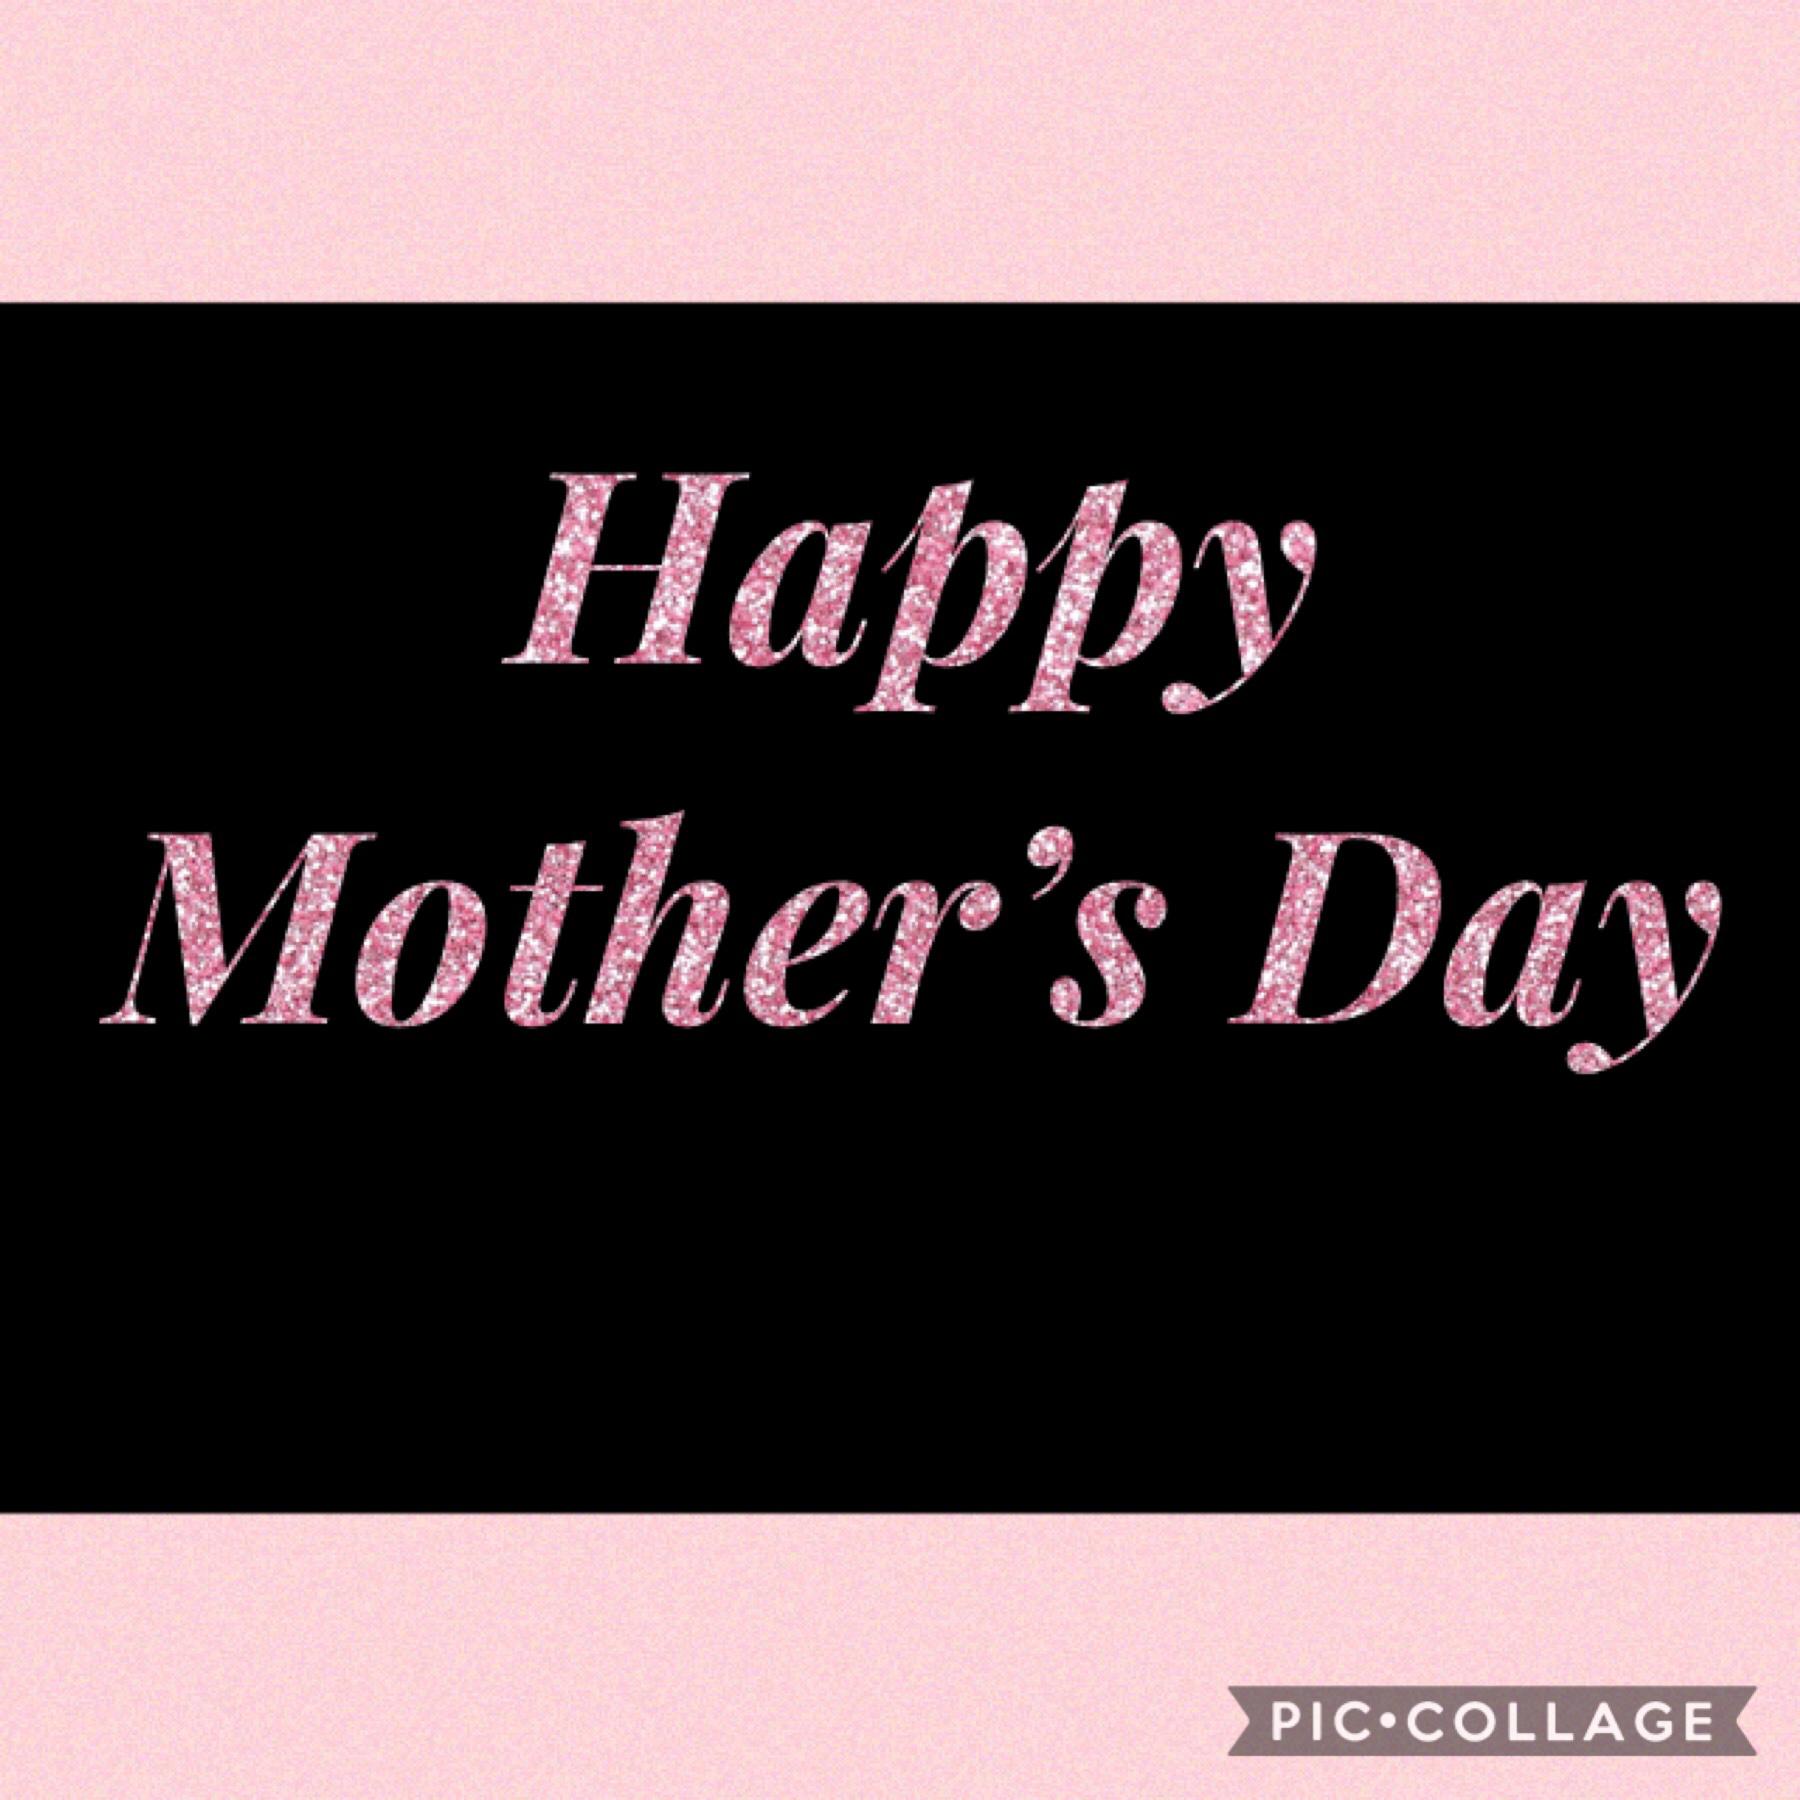 Happy Mother’s Day 
